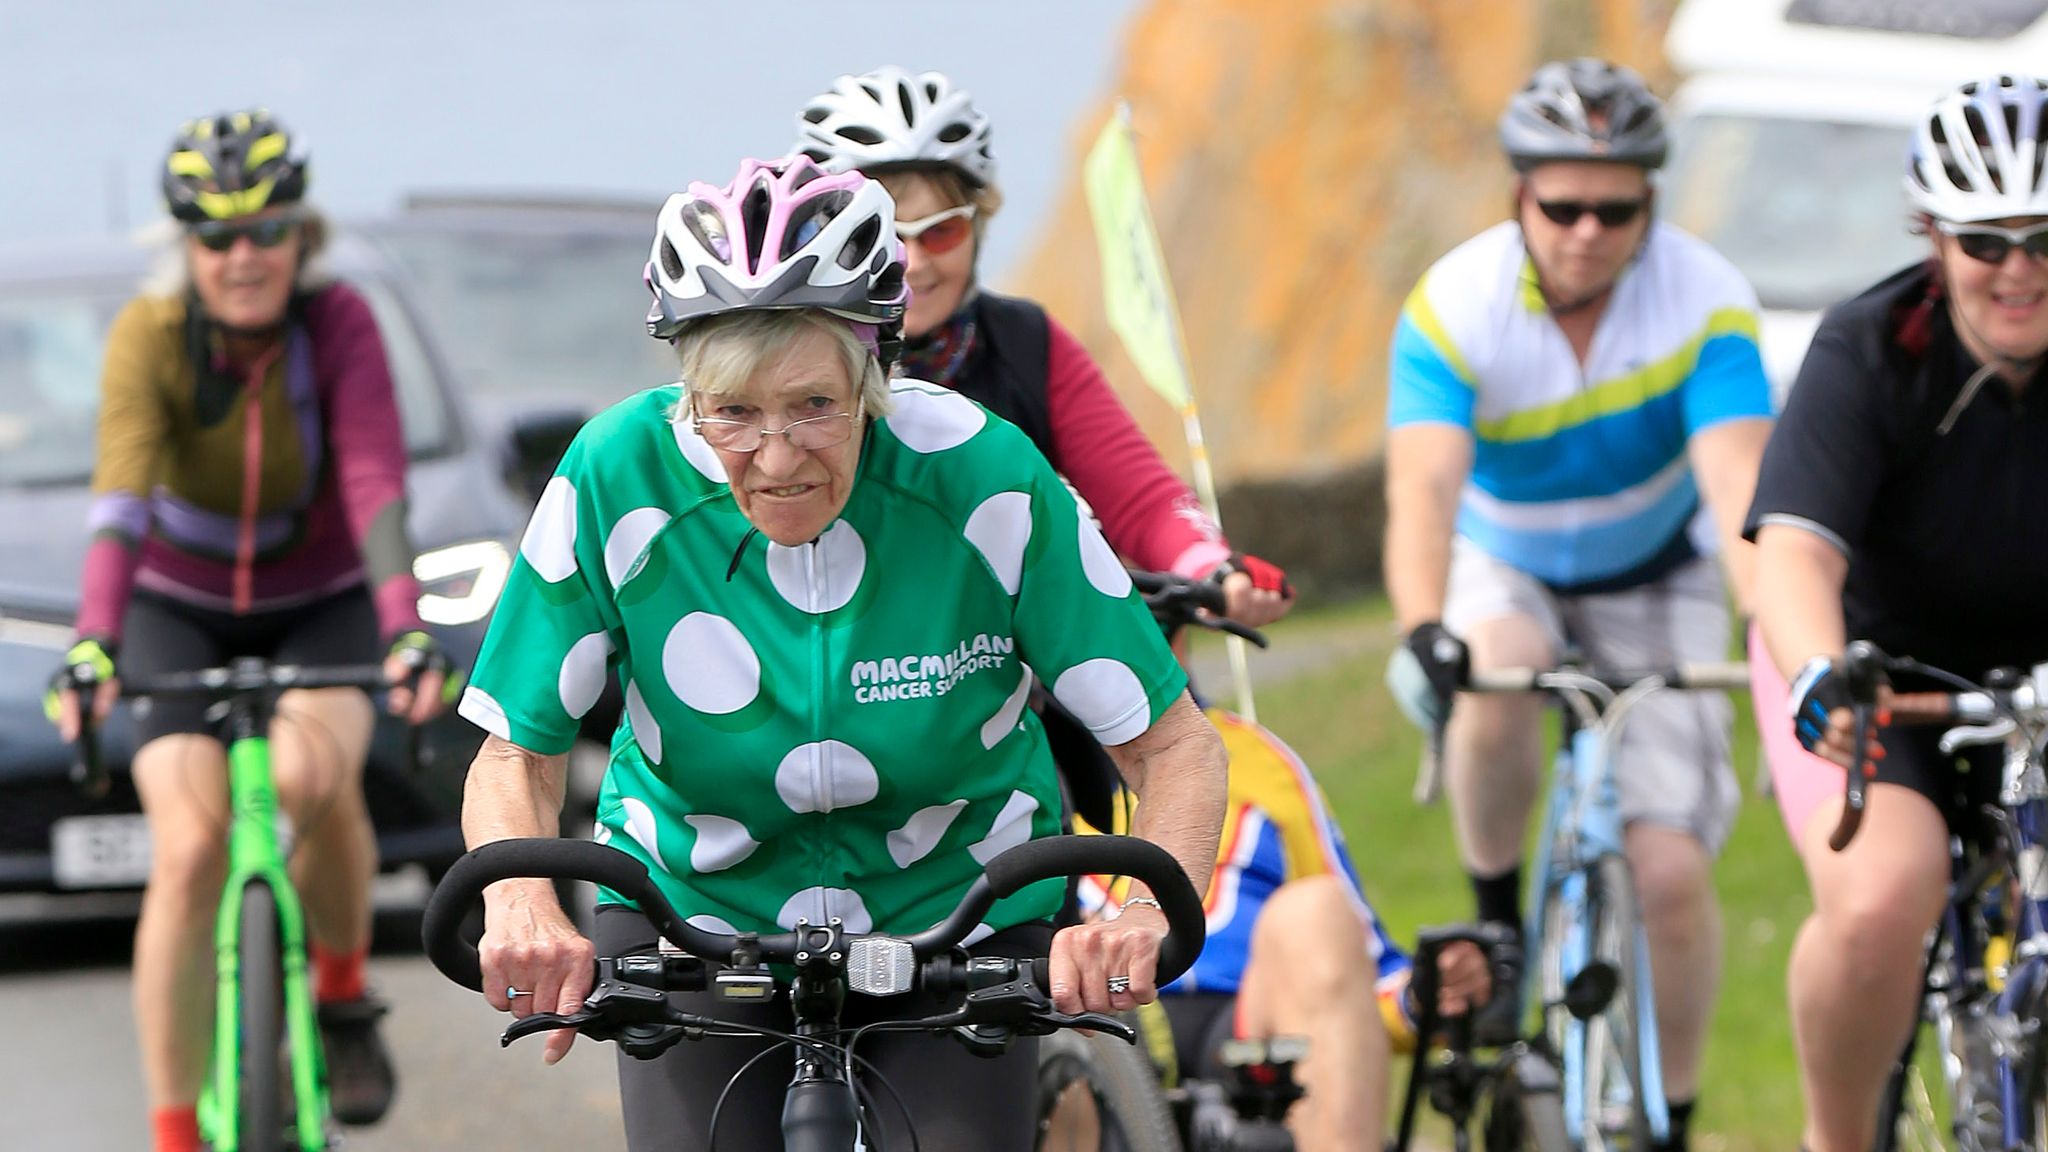 Granny Mave 85 Year Old Woman Completes 1 000 Mile Bike Ride For Charity Uk News Sky News